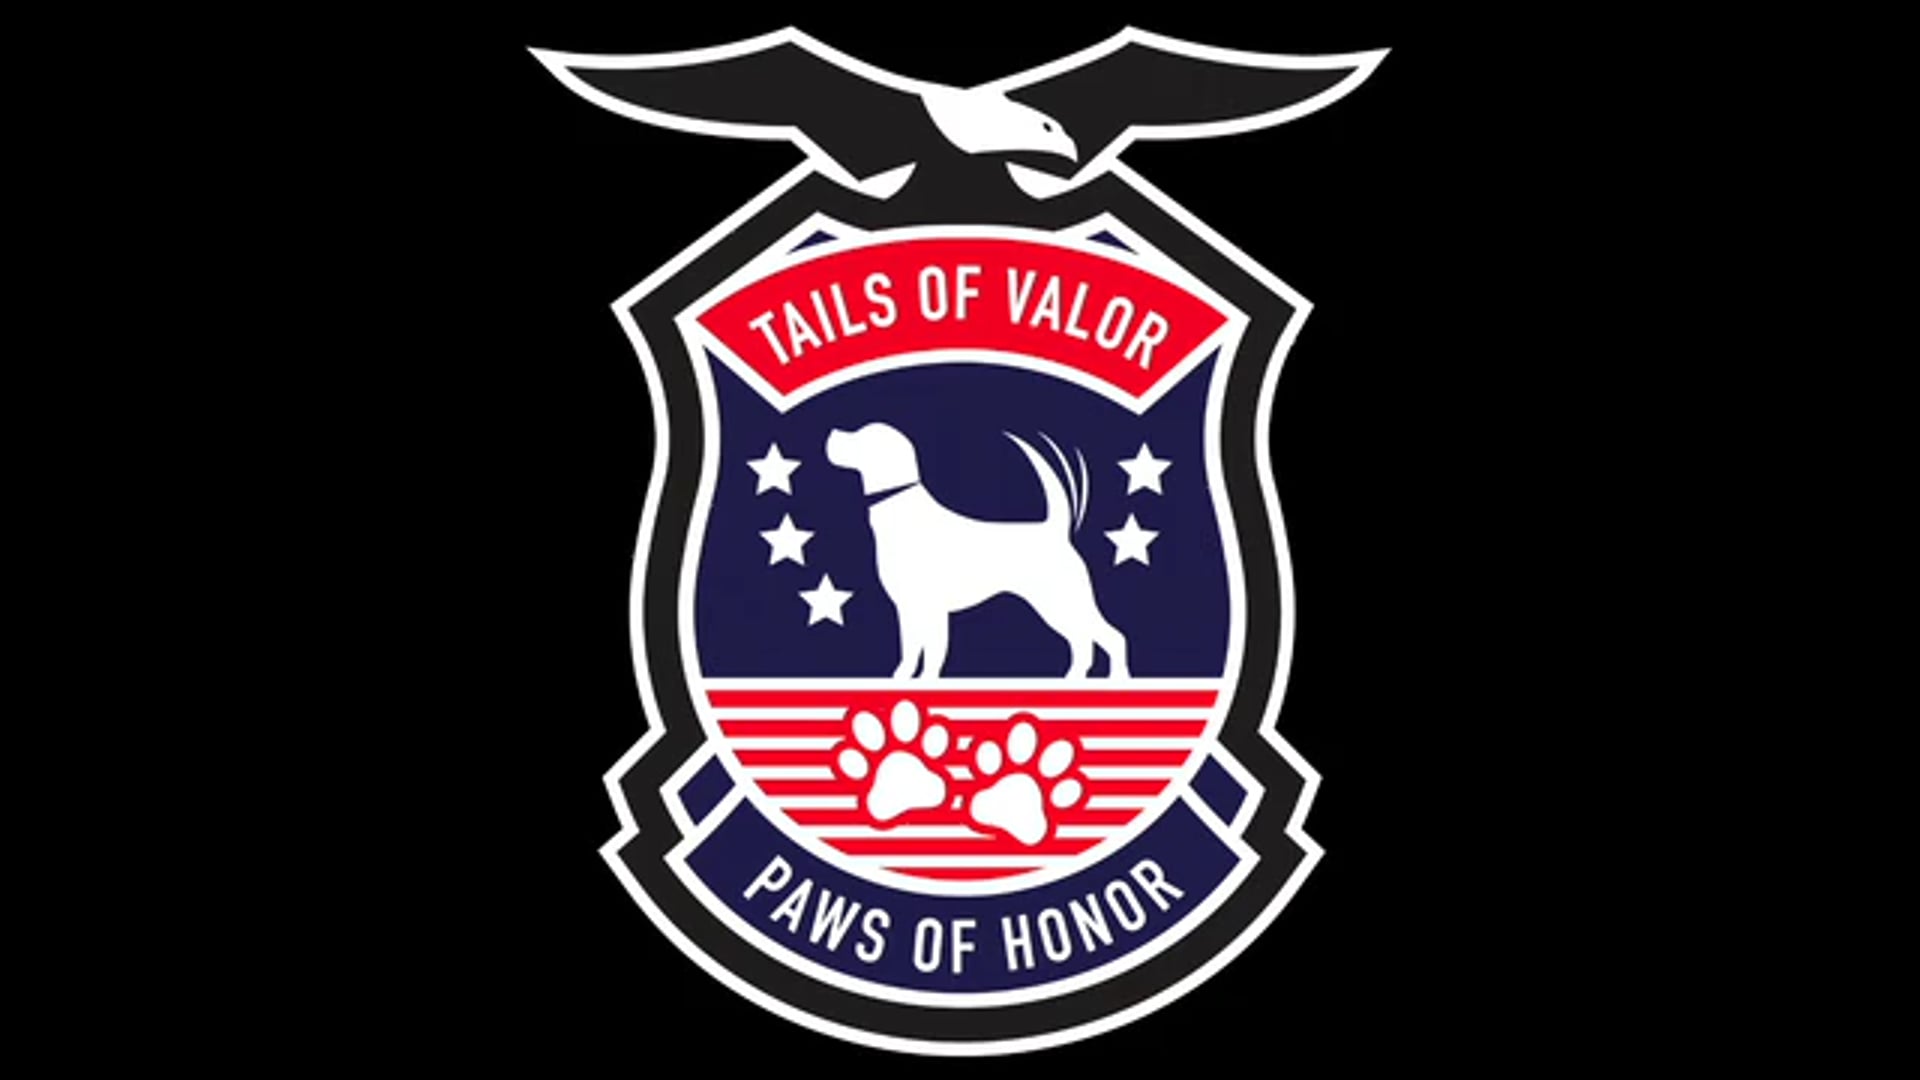 Tails of Valor 2020